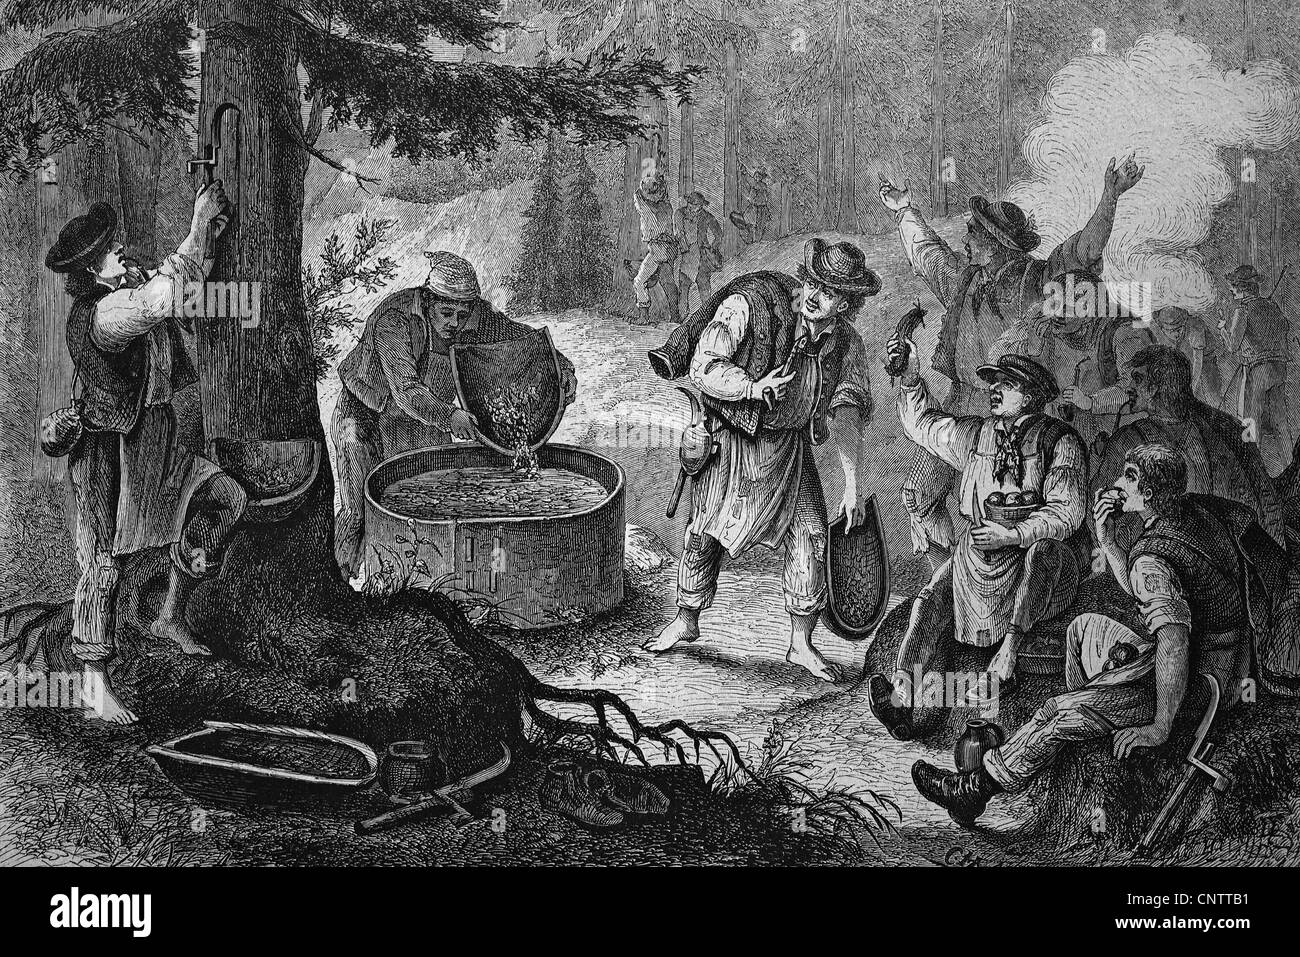 Pitchers boiling pitch from tree resin in Vogtland, historical engraving, circa 1870 Stock Photo